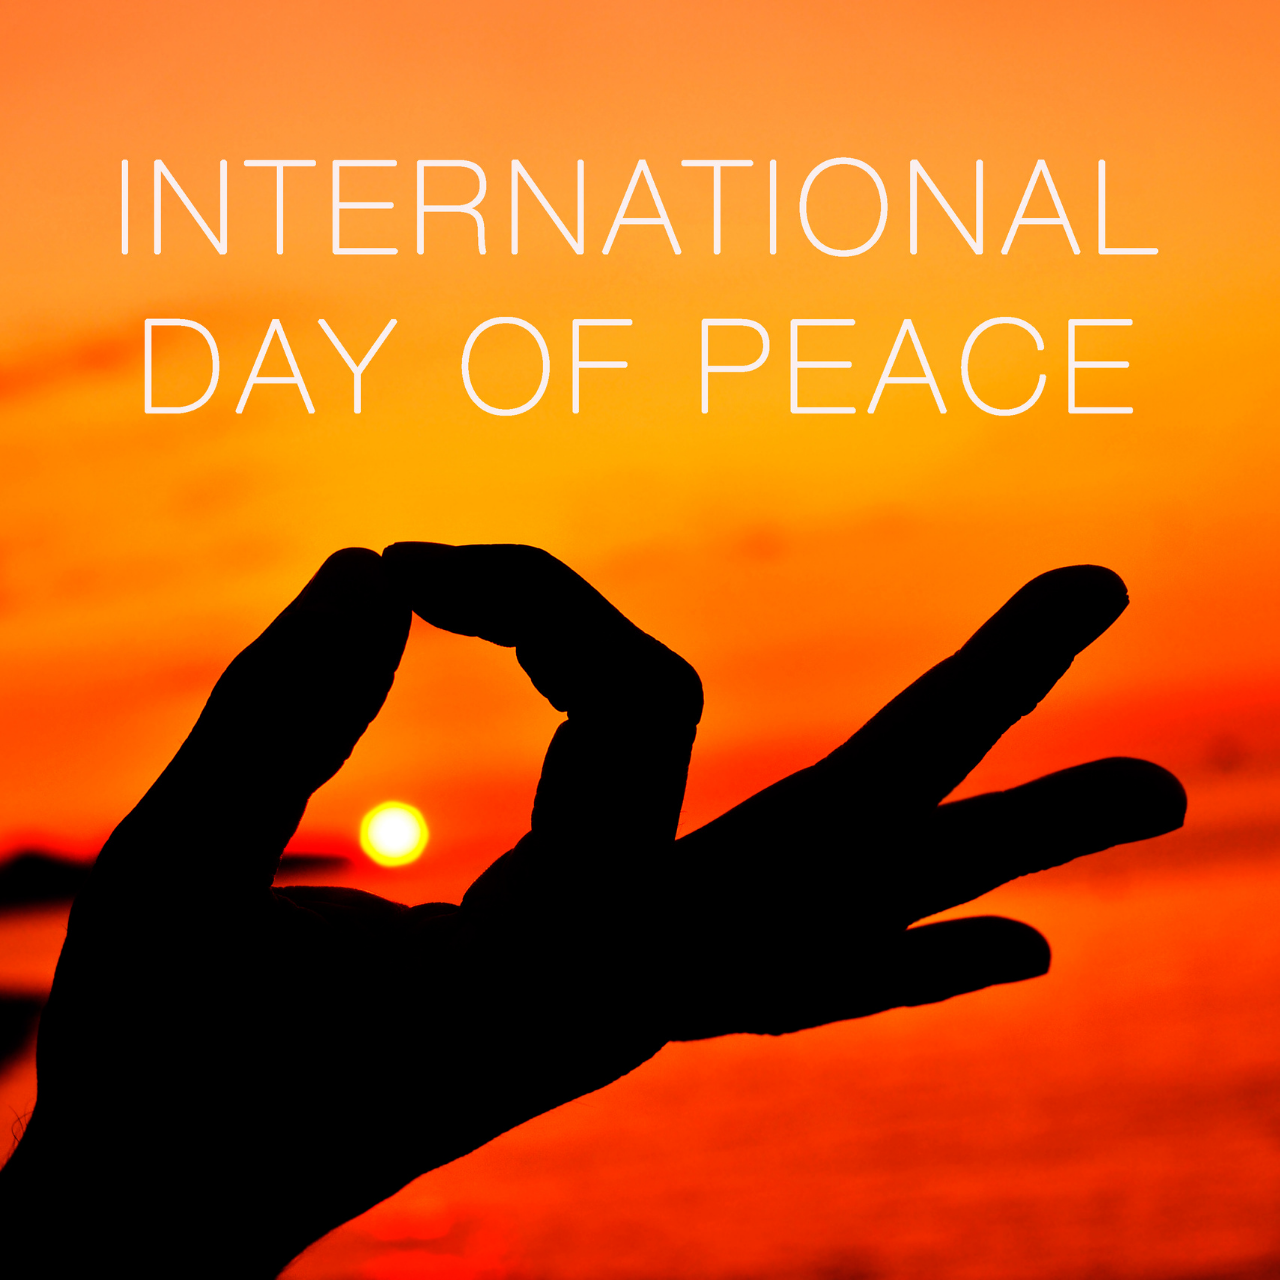 International Day of Peace 2021 Theme, History, Meaning, Significance, Celebration, Activities and More